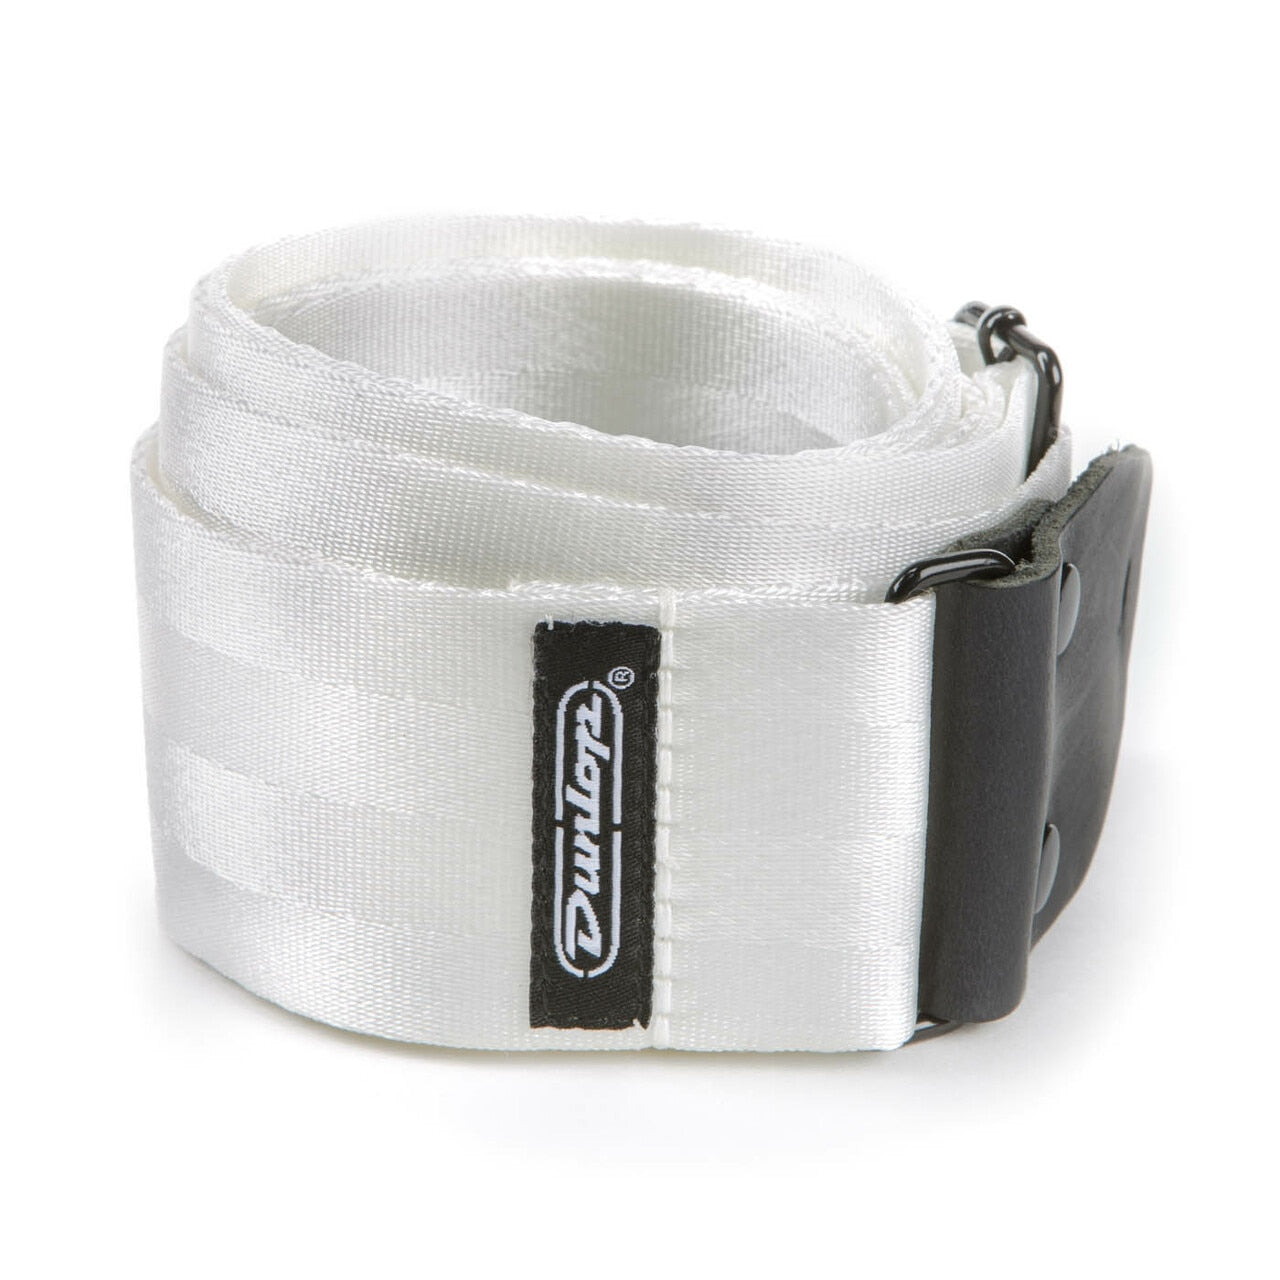 Dunlop Deluxe Seatbelt White Strap (DST7001WH)